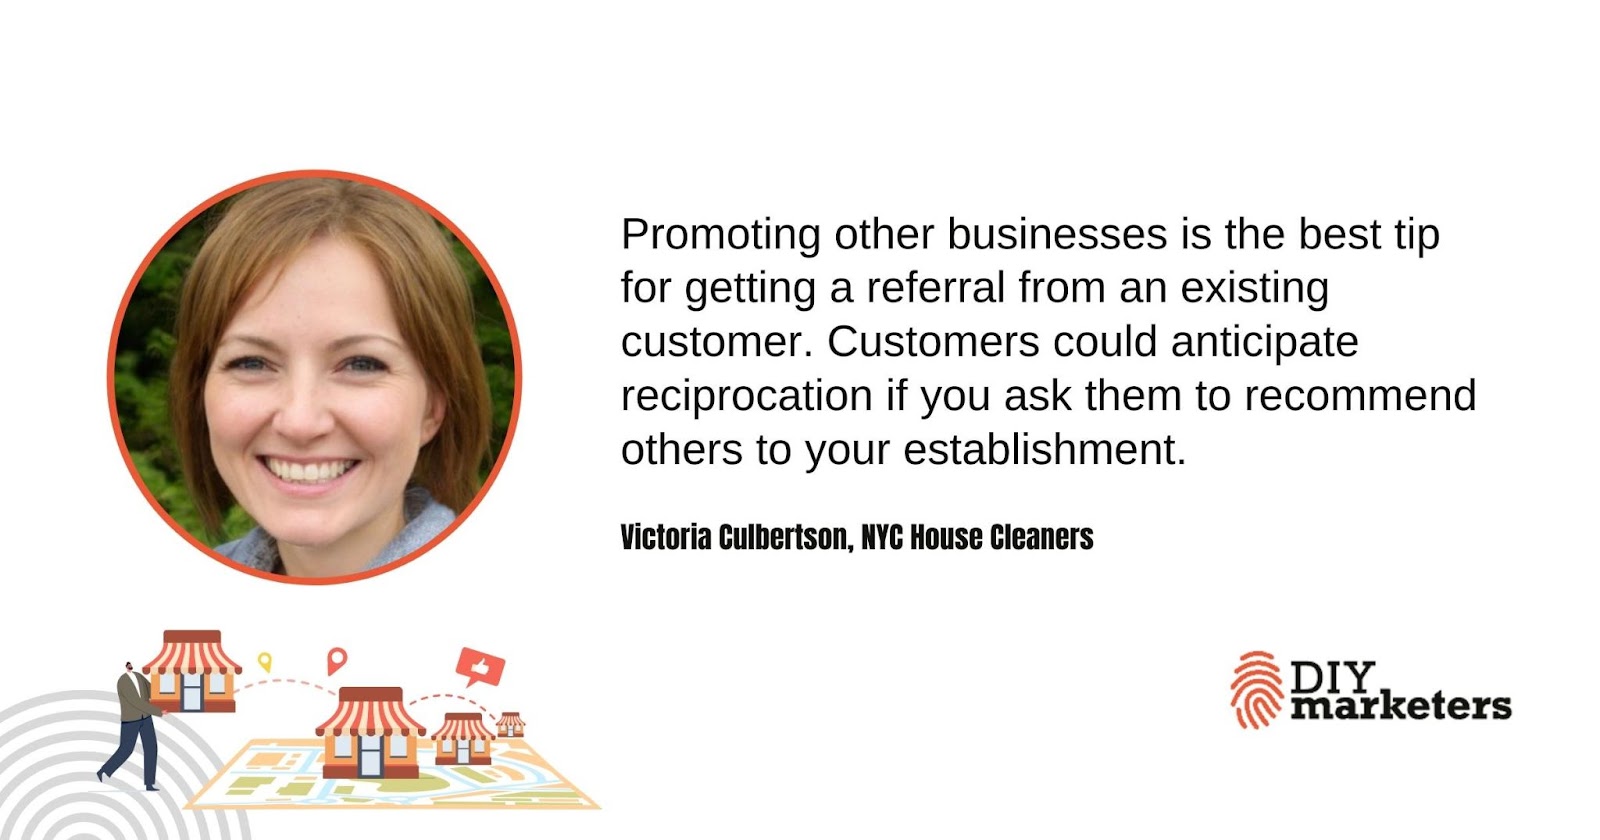 Victoria Culbertson, NYC House Cleaner - Get customers to refer you